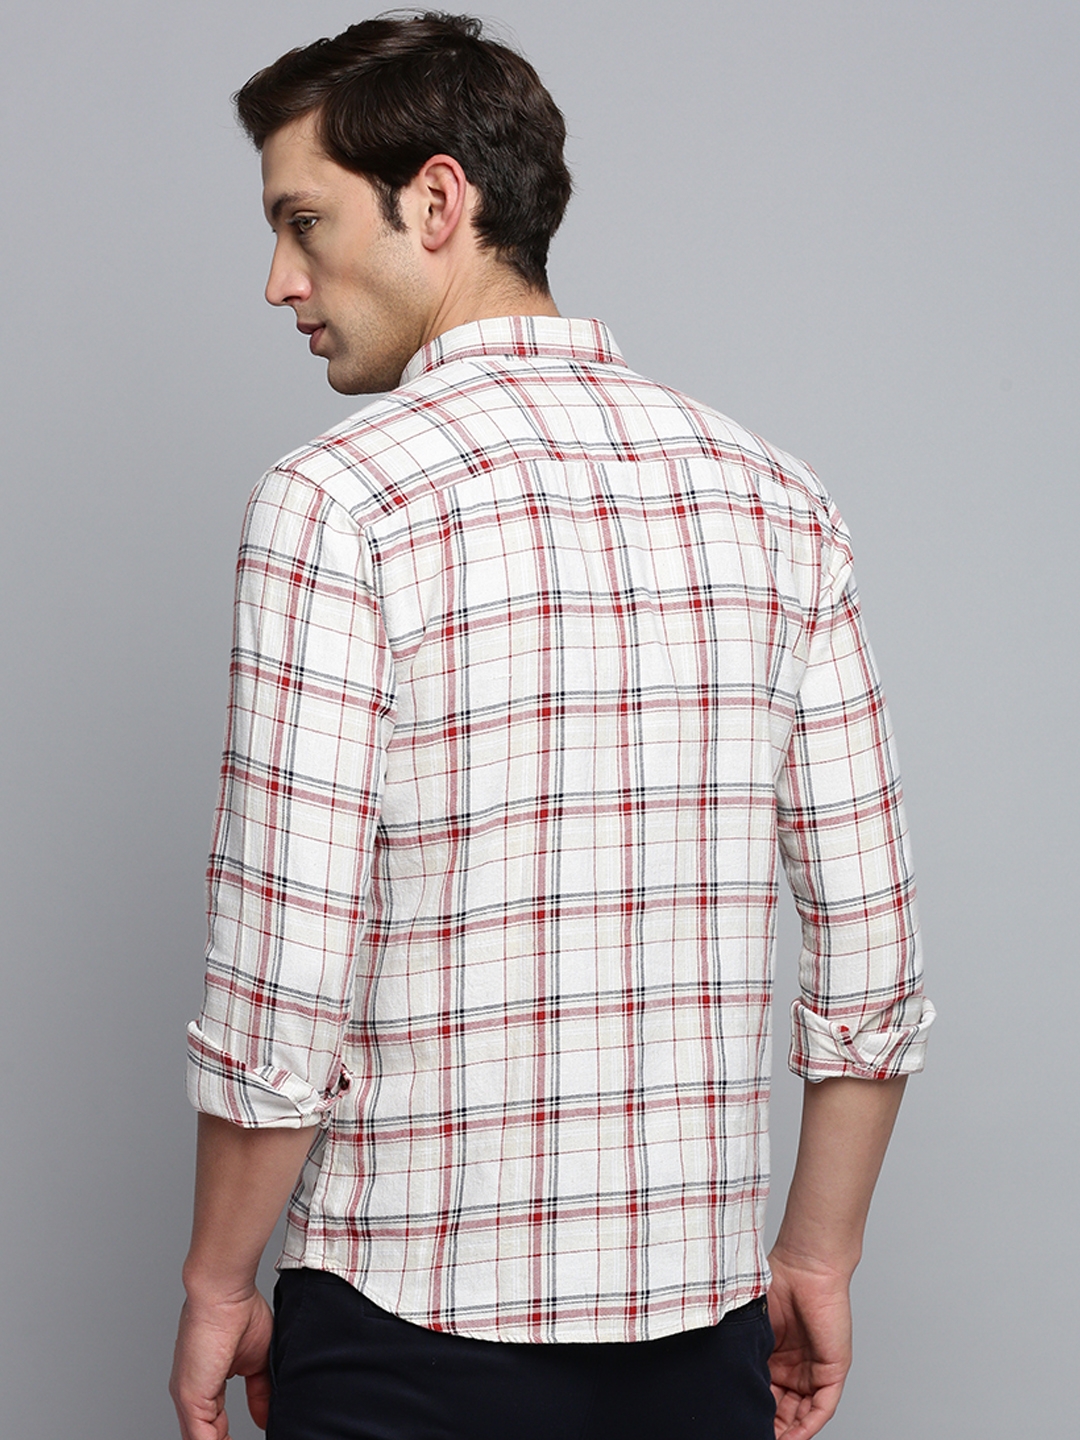 Showoff | SHOWOFF Men's Spread Collar Checked Beige Classic Shirt 3